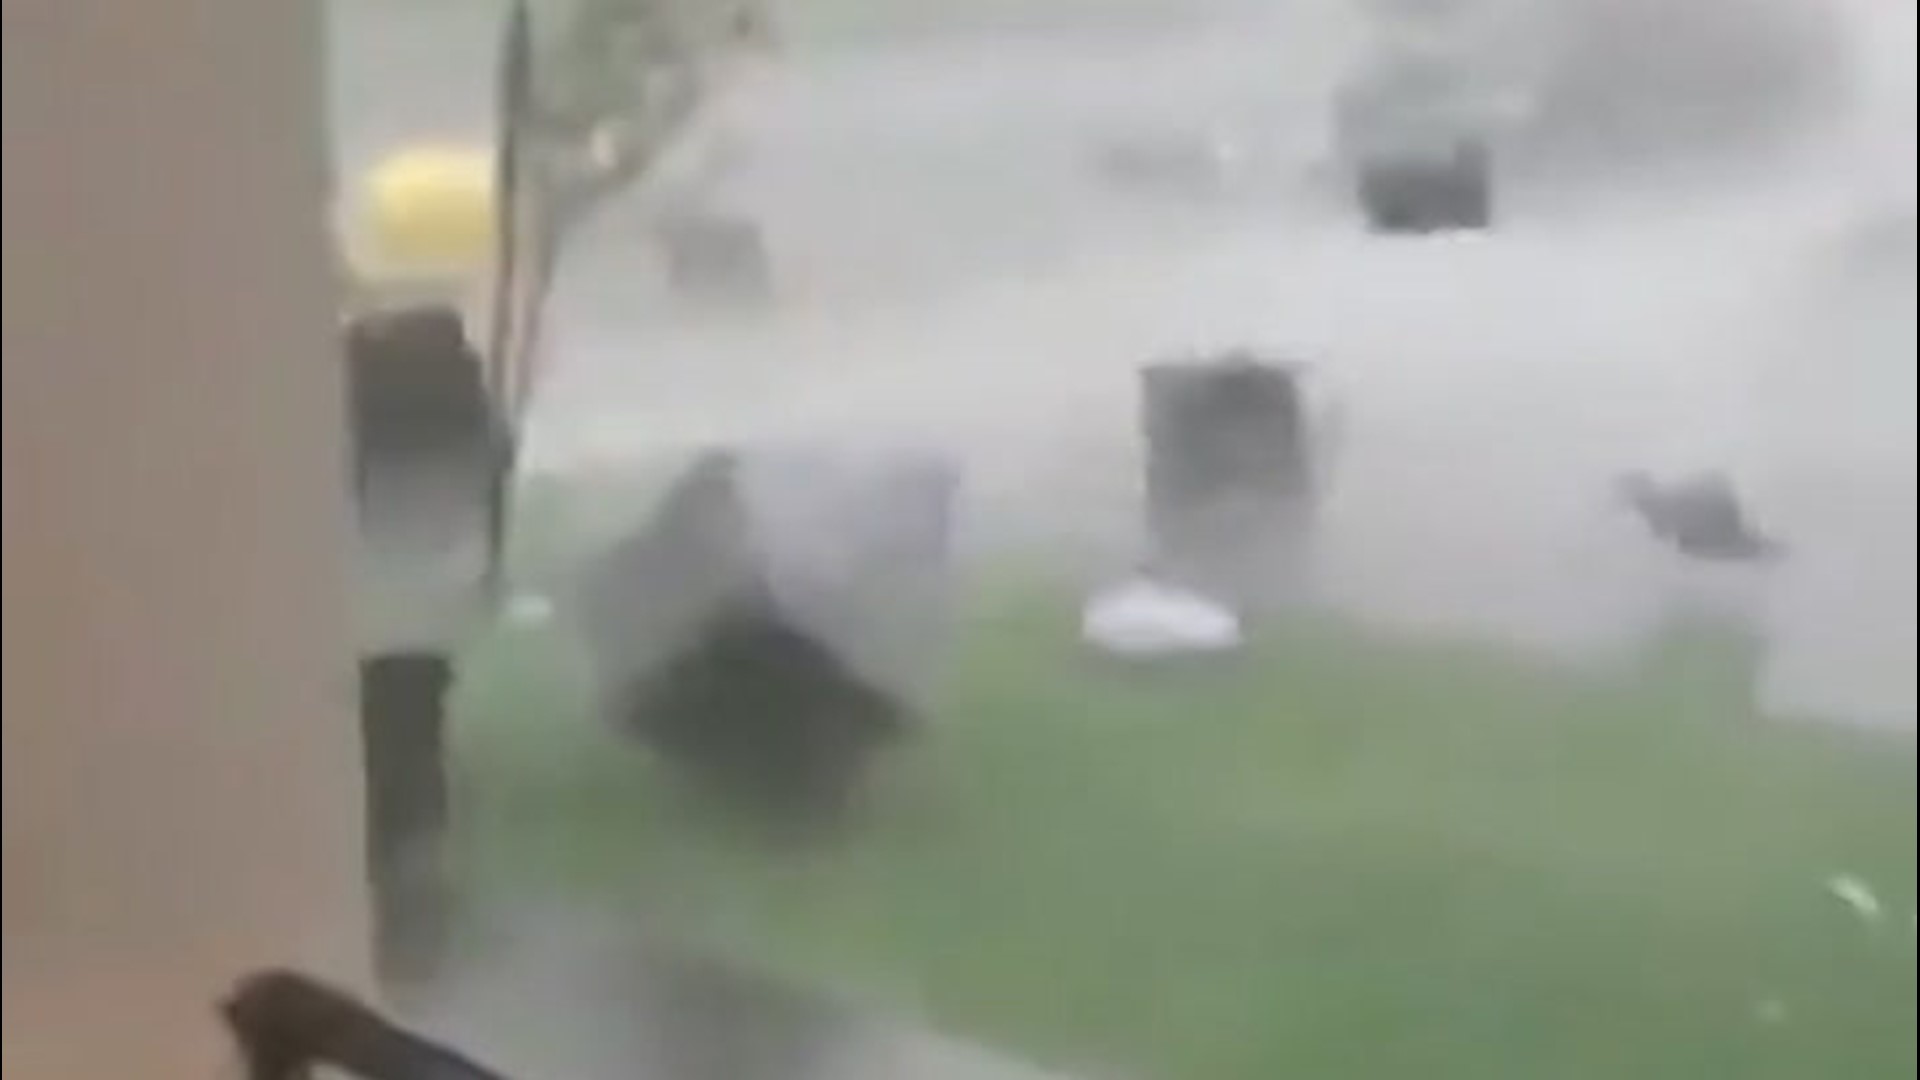 As thunderstorms swept through Lakewood, New Jersey, on June 3, powerful winds sent outdoor furniture flying down a street.